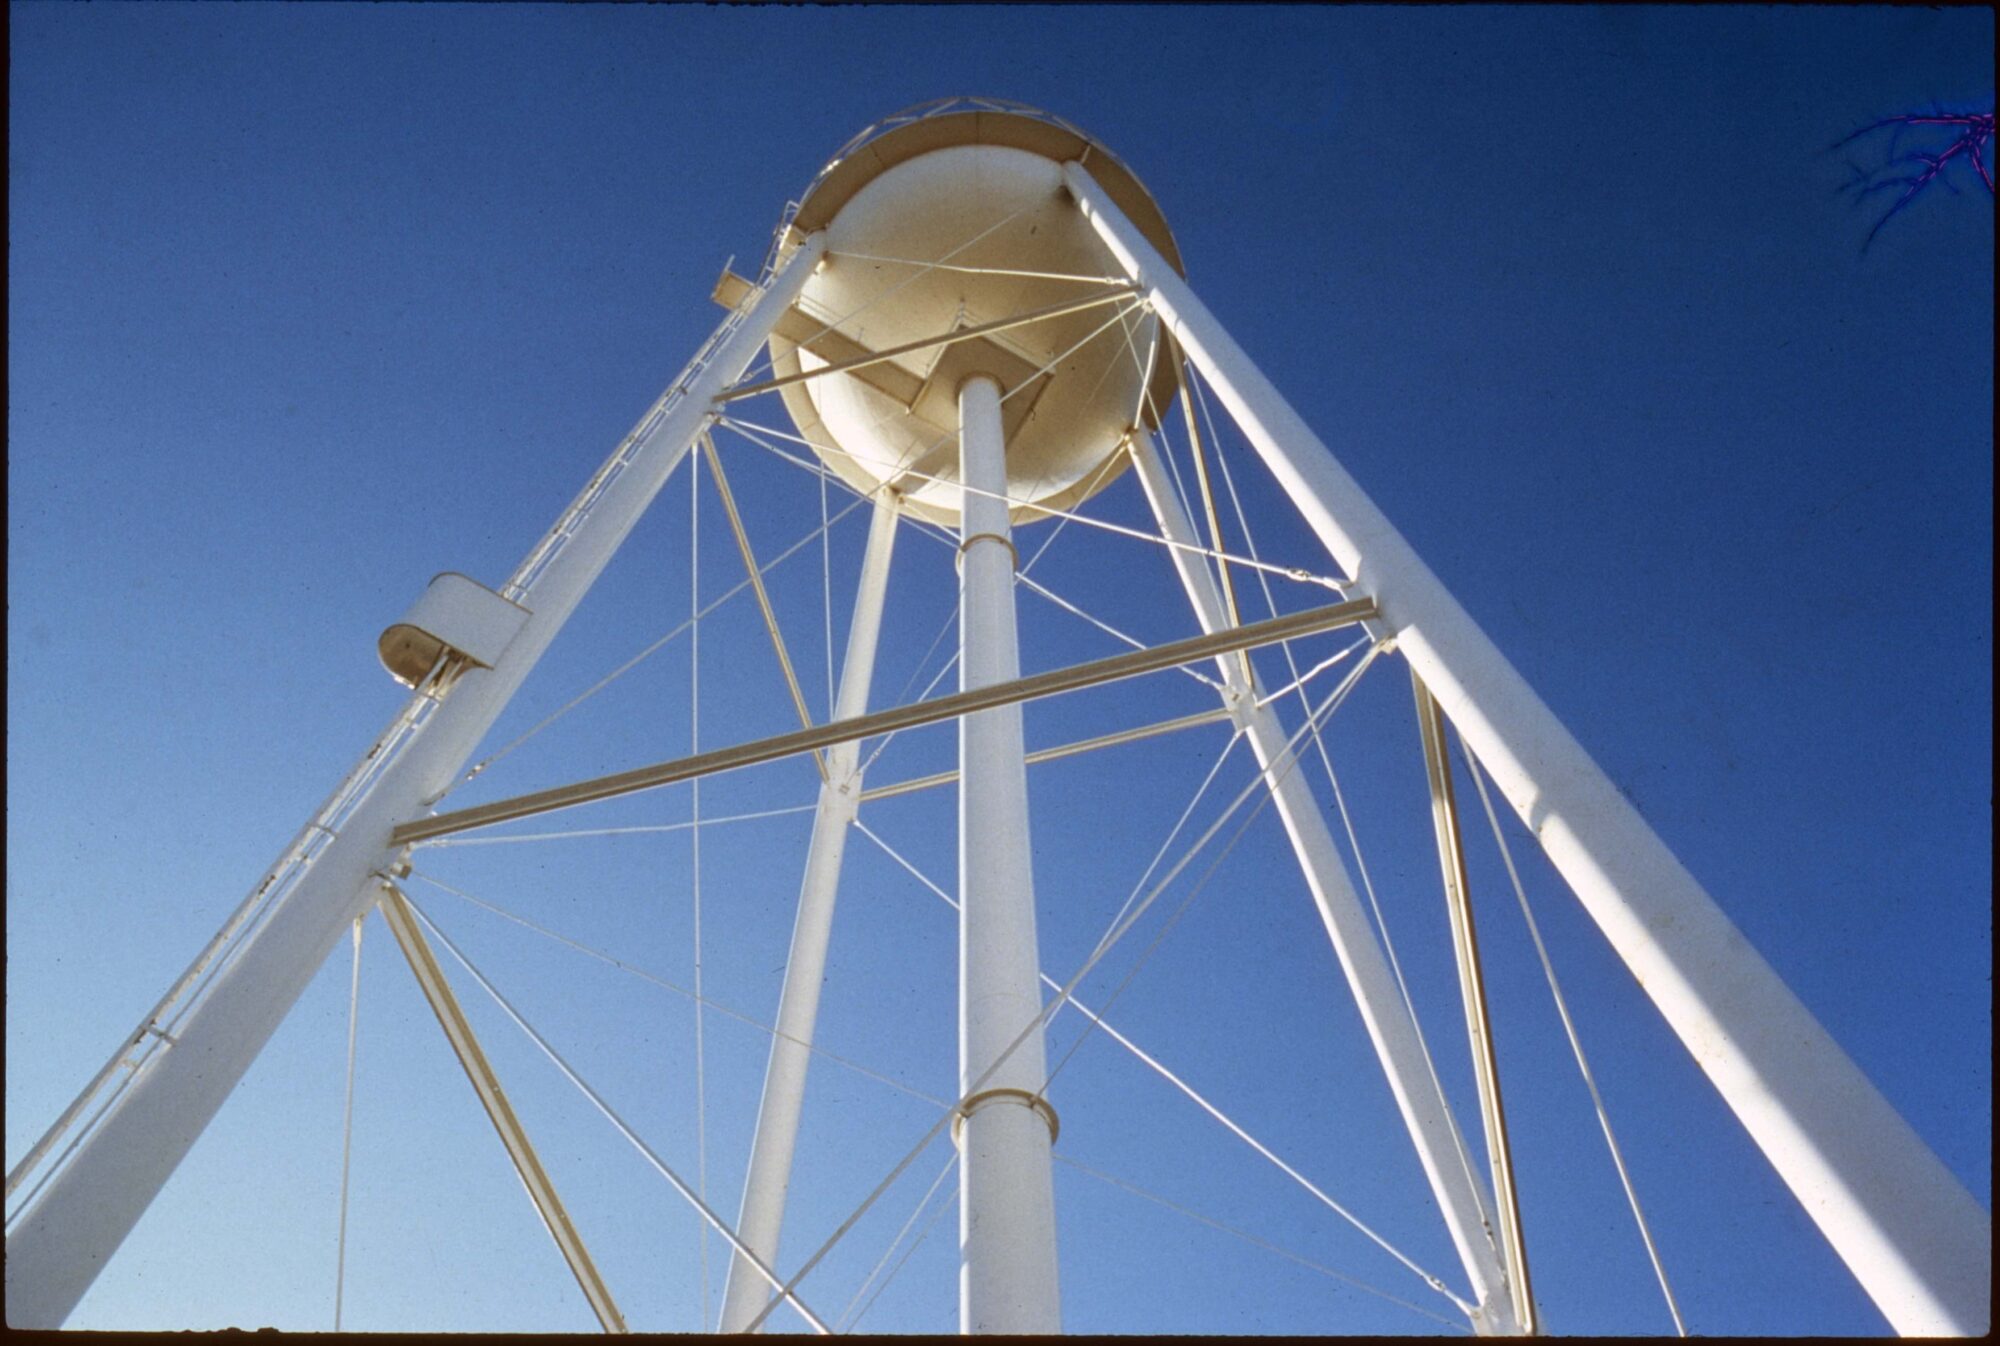 Photograph of a water tower from underneath